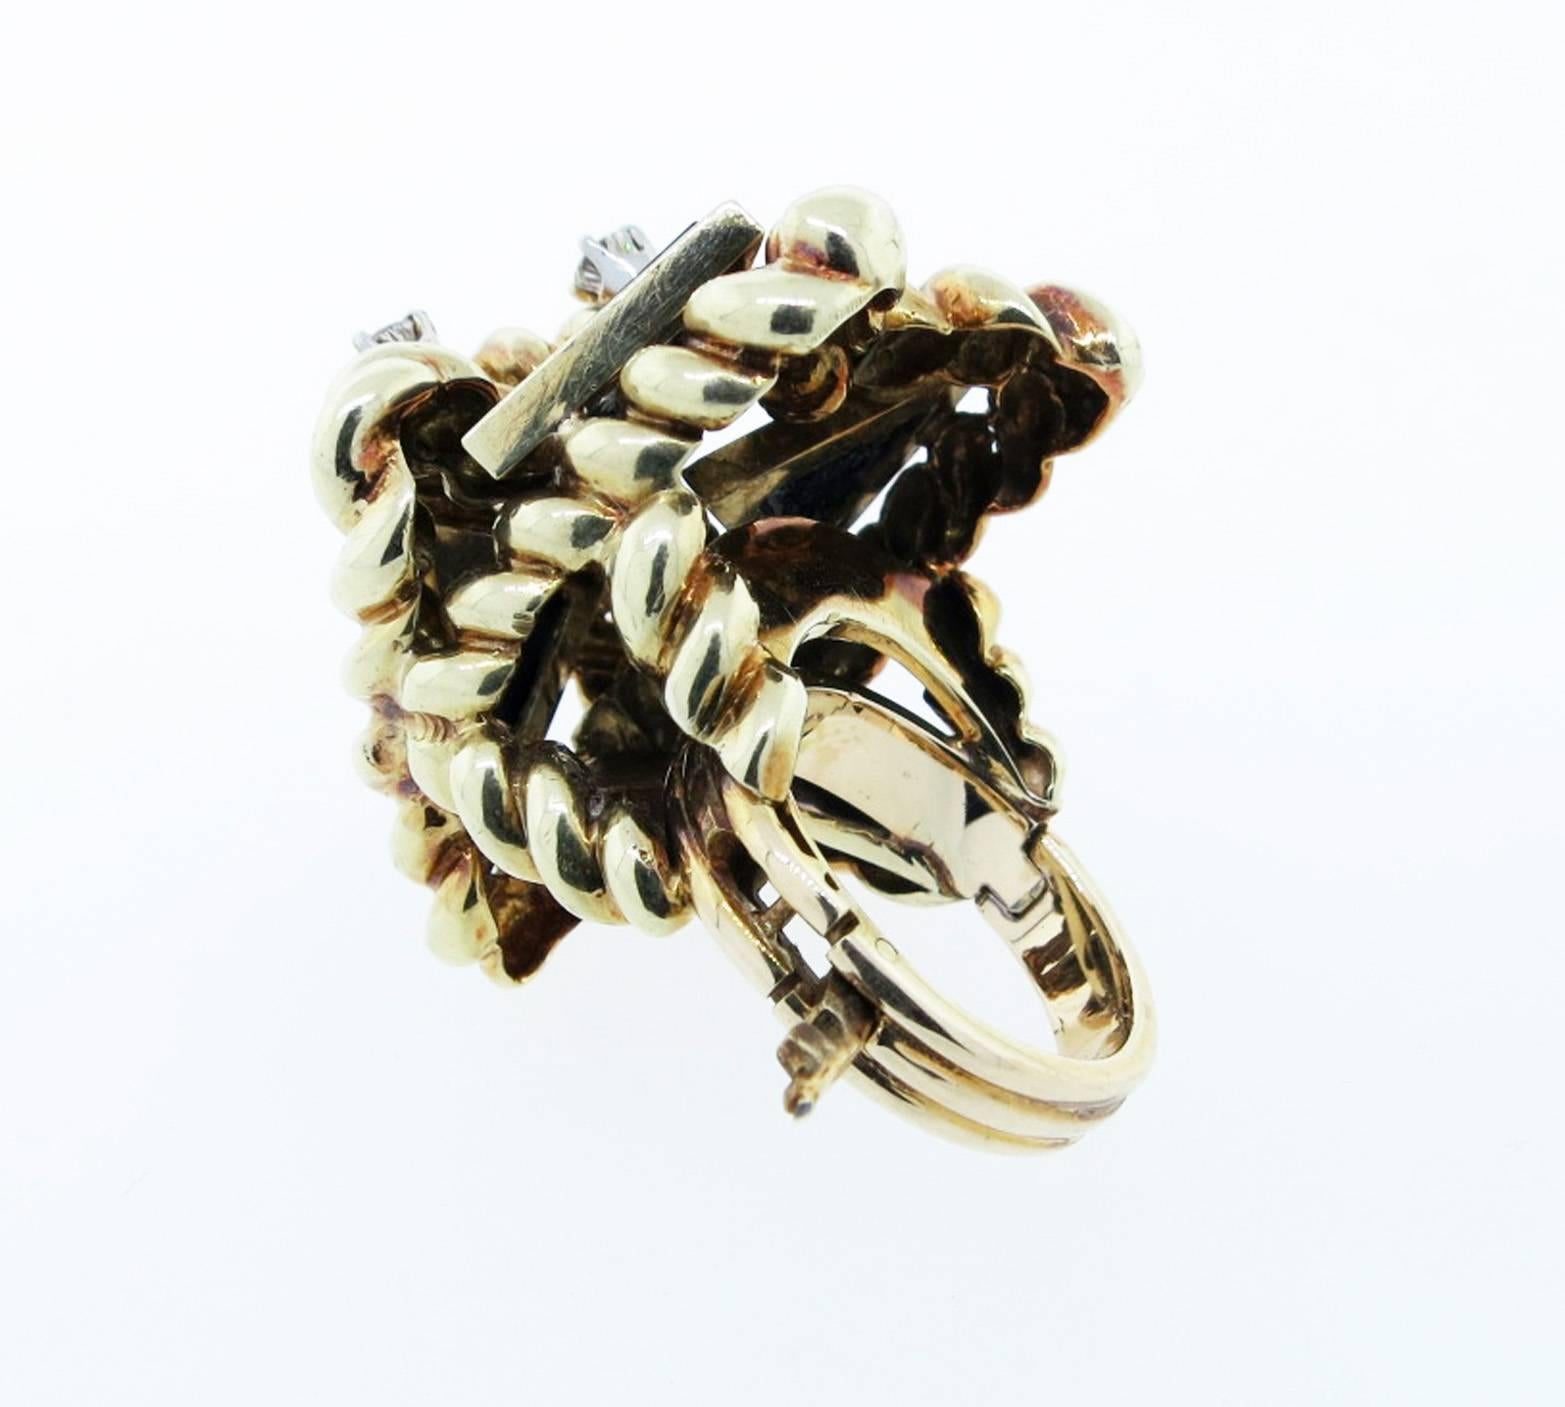 Over sized dimensional 18kt. yellow gold rope design ring measuring over 1 1/4  inches in length in a modernist design.
The ring is set with three bezel set triangles of black onyx and prong set with three round brilliant cut diamonds each weighing